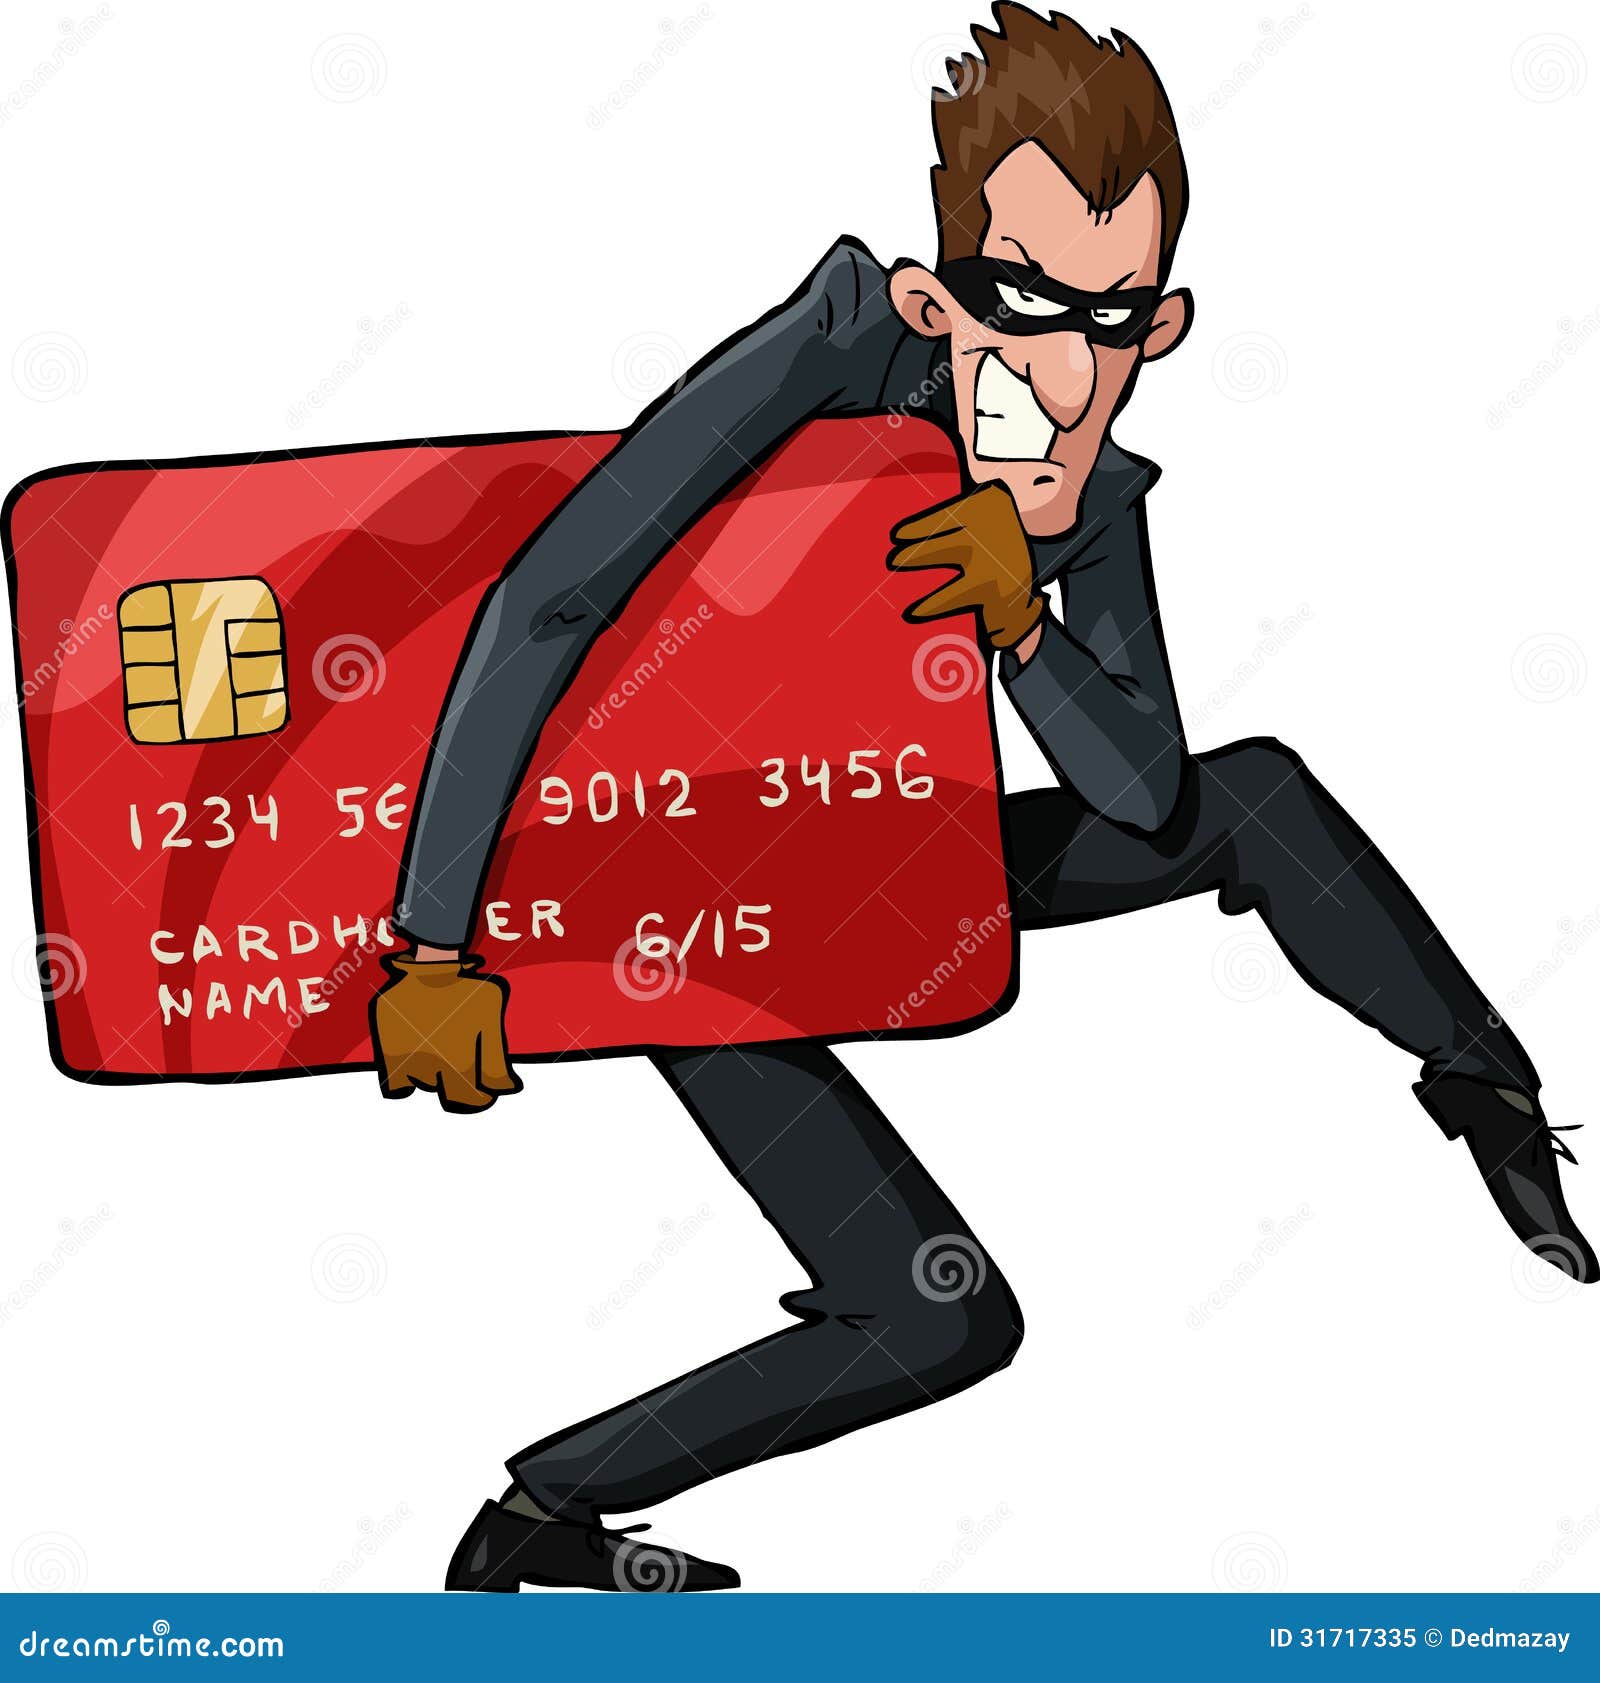 bank security clipart - photo #37